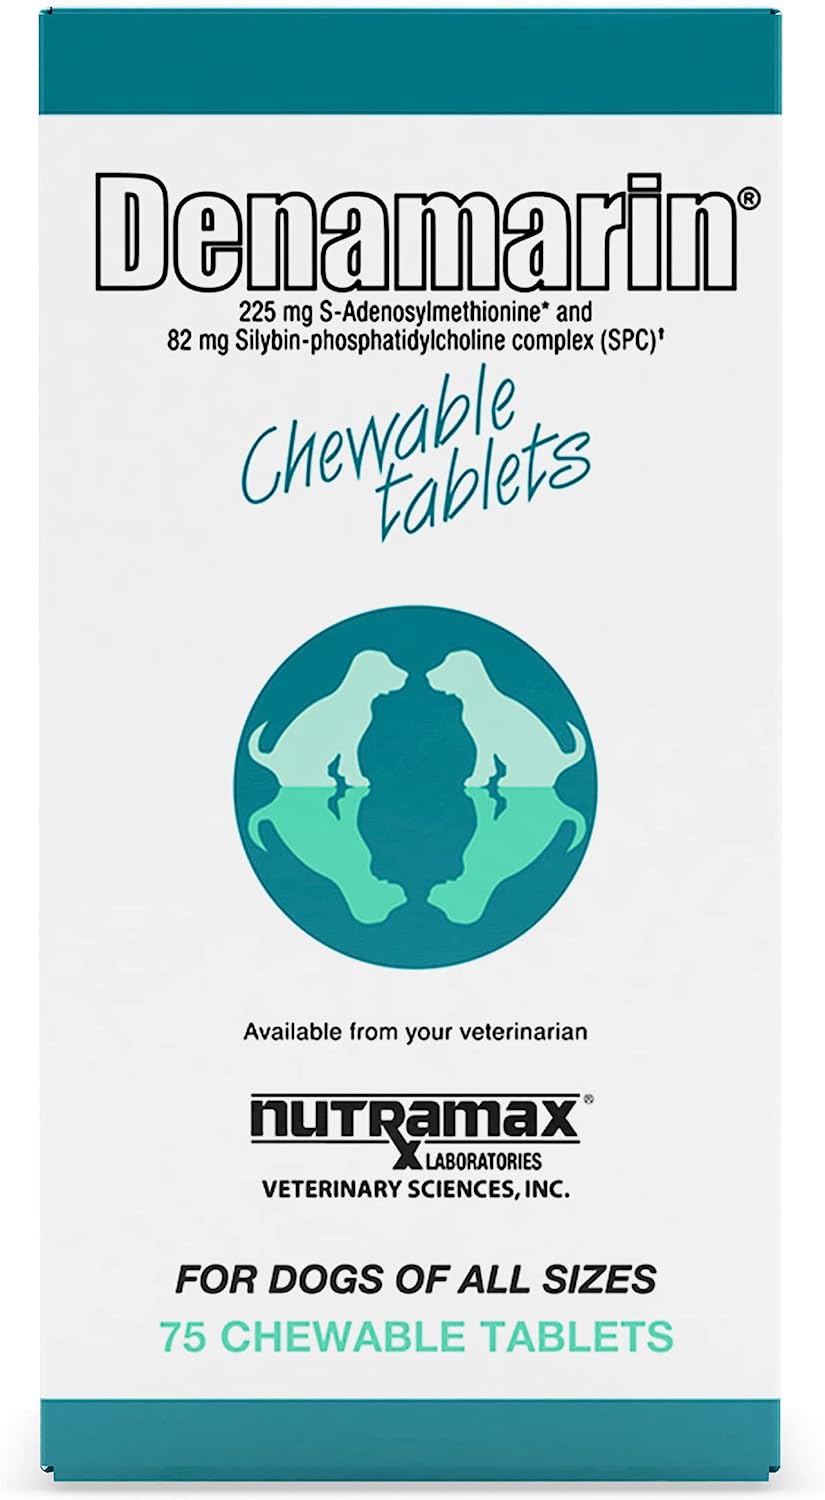 Nutramax Laboratories Denamarin for Dogs Chewable Tablets - 75 Count